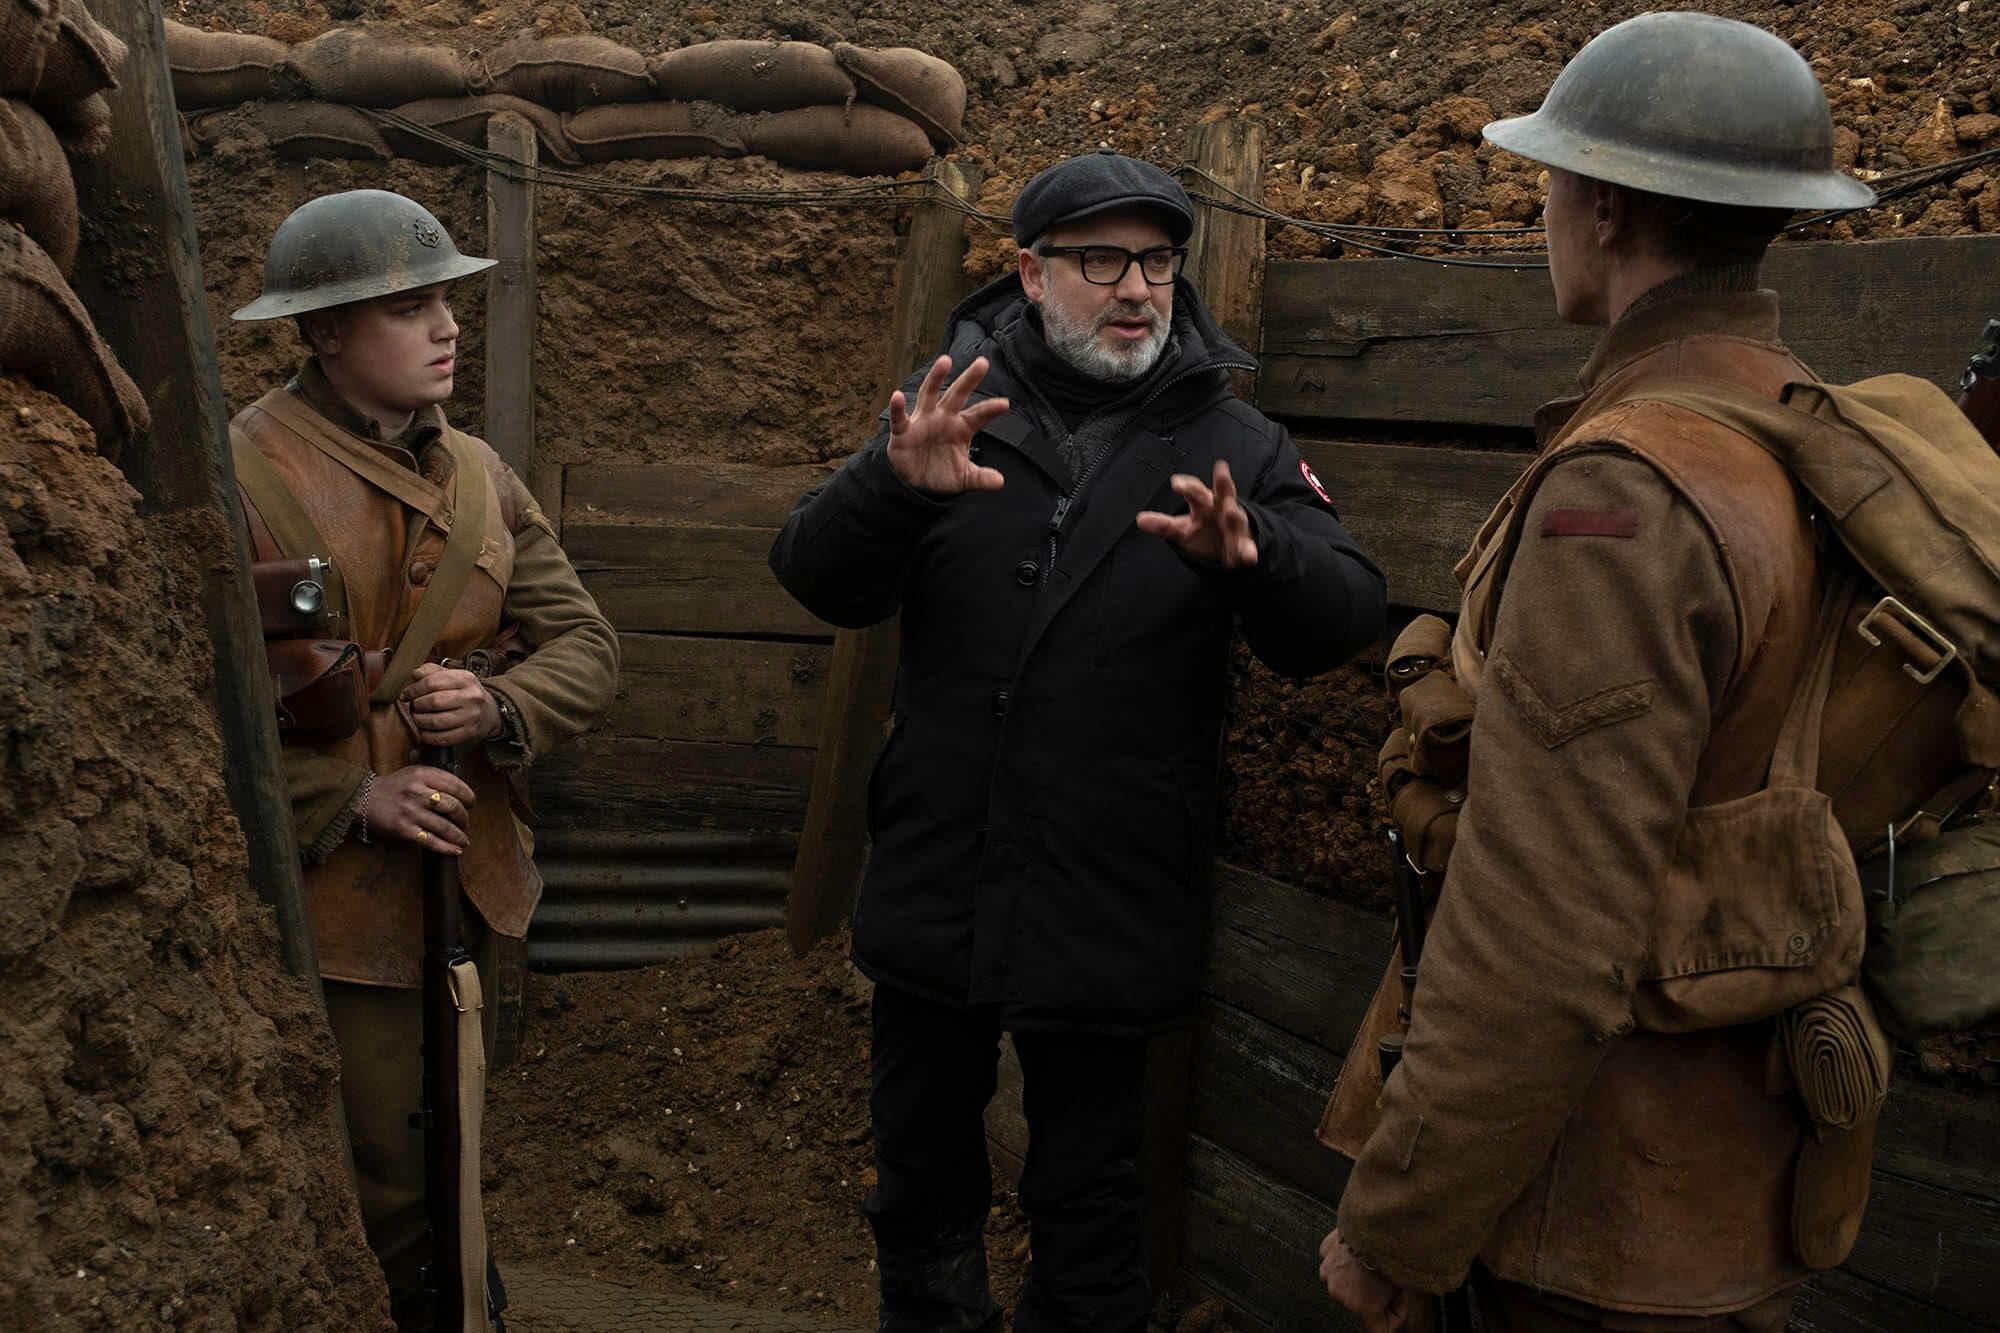 "1917" director Sam Mendes speaks with the film's stars, George MacKay and Dean-Charles Chapman.